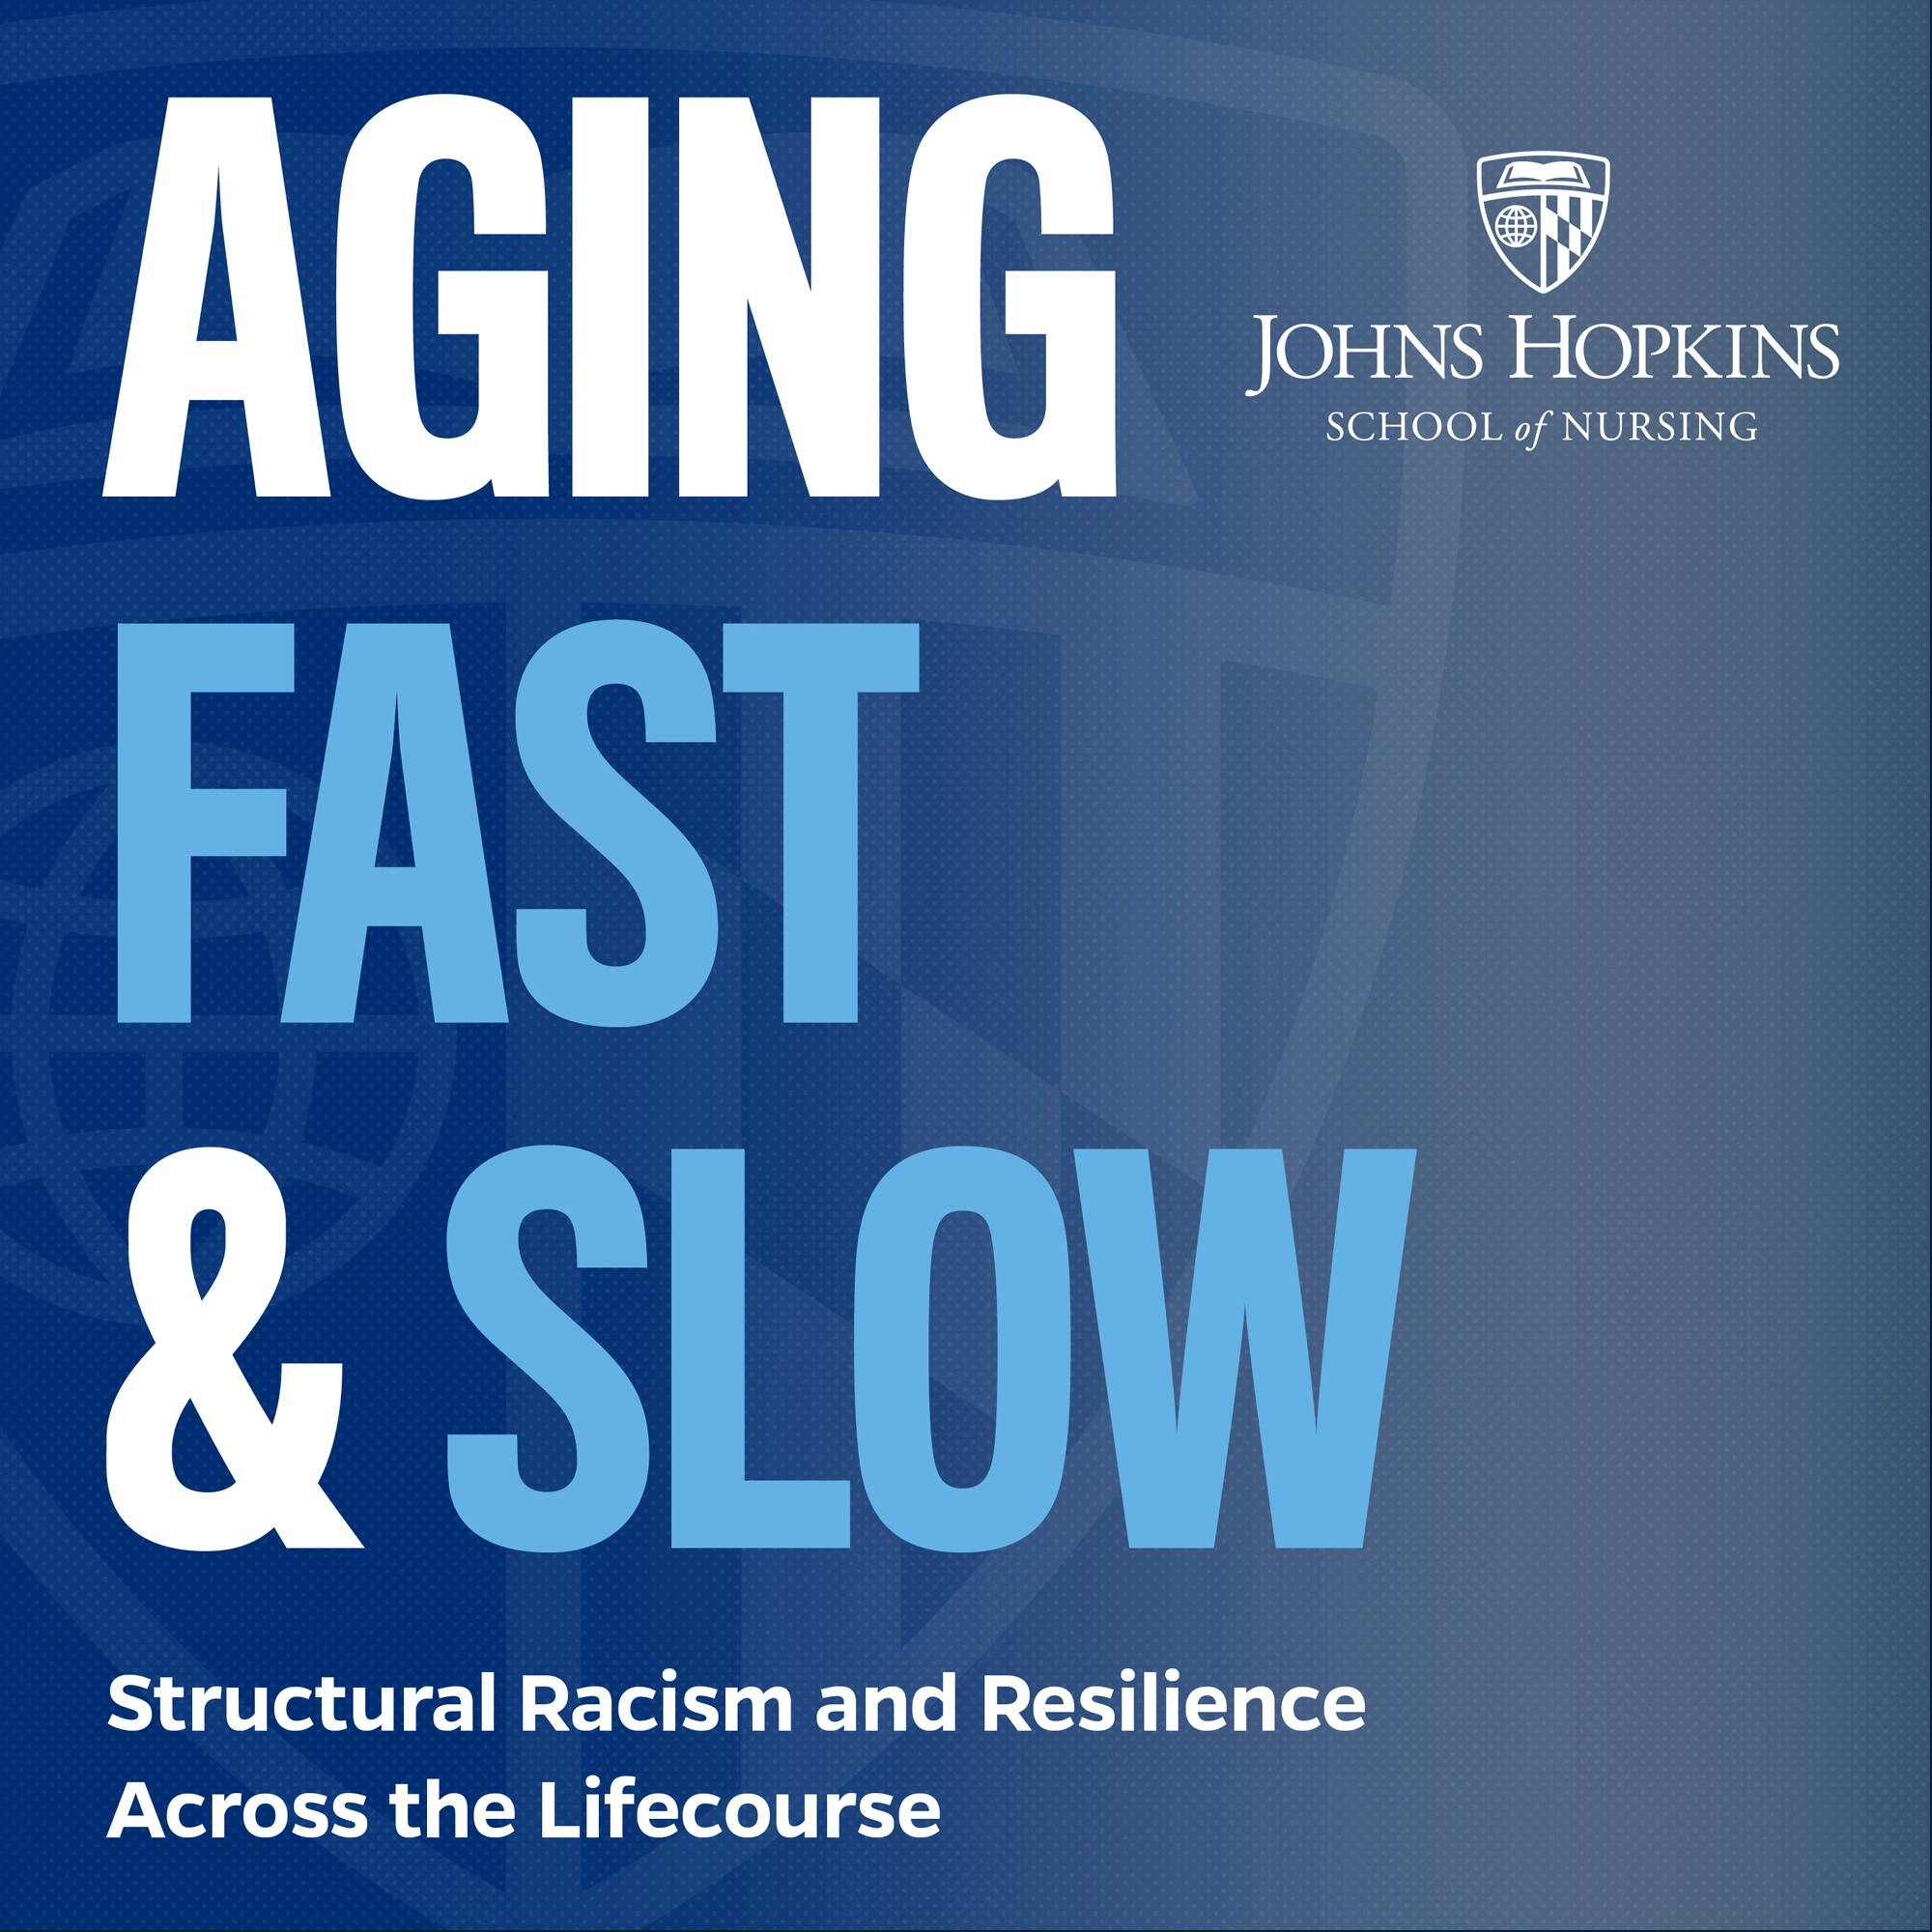 Aging Fast & Slow: Shaping a Fair Health Landscape